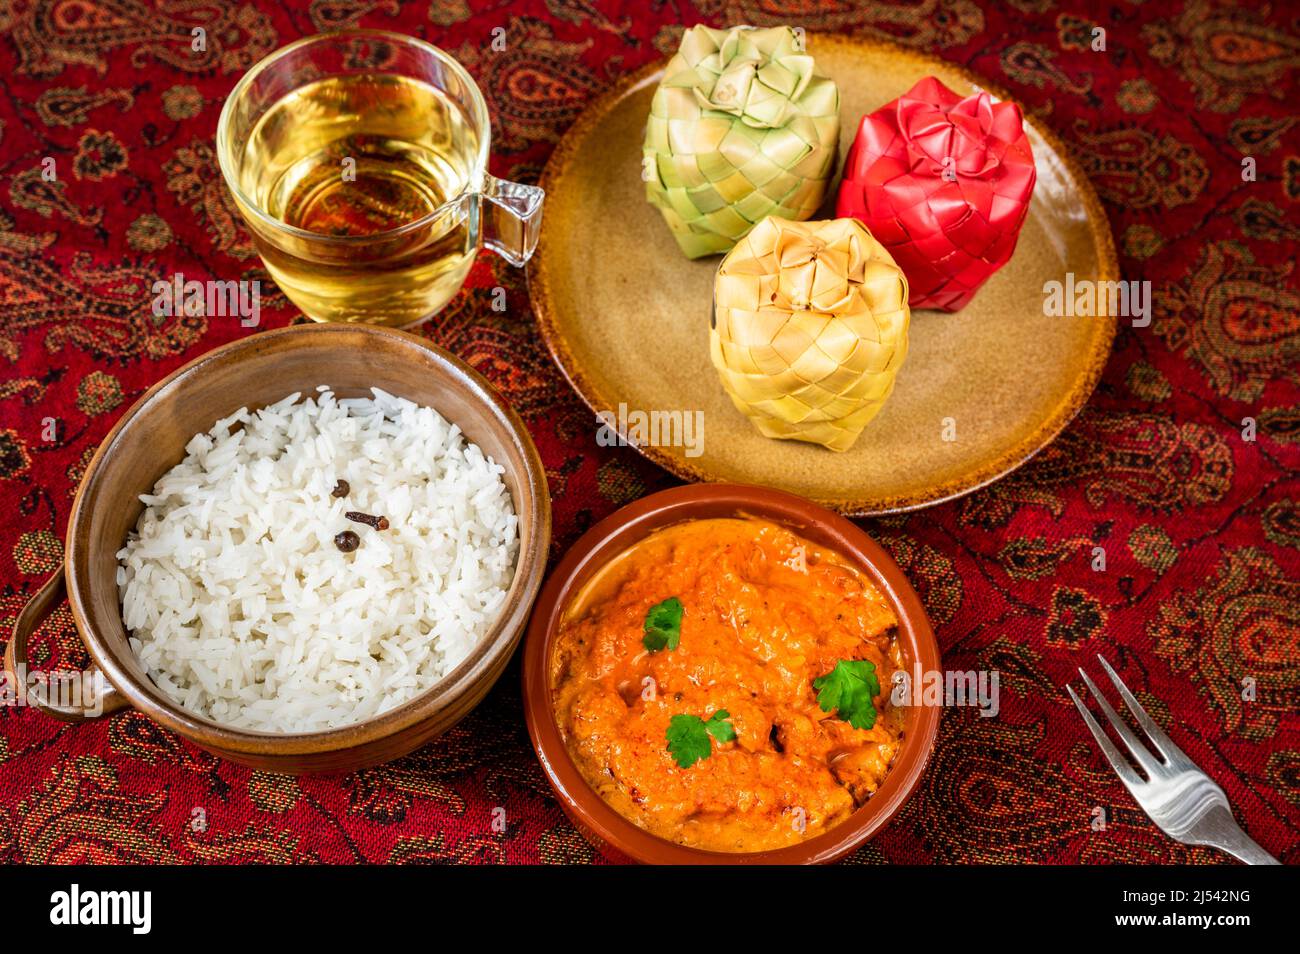 Chicken tikka masala, stewed rice, cup of tea, 3 bamboo spice container on plate on red oriental table-cloth. Indian meal. Stock Photo